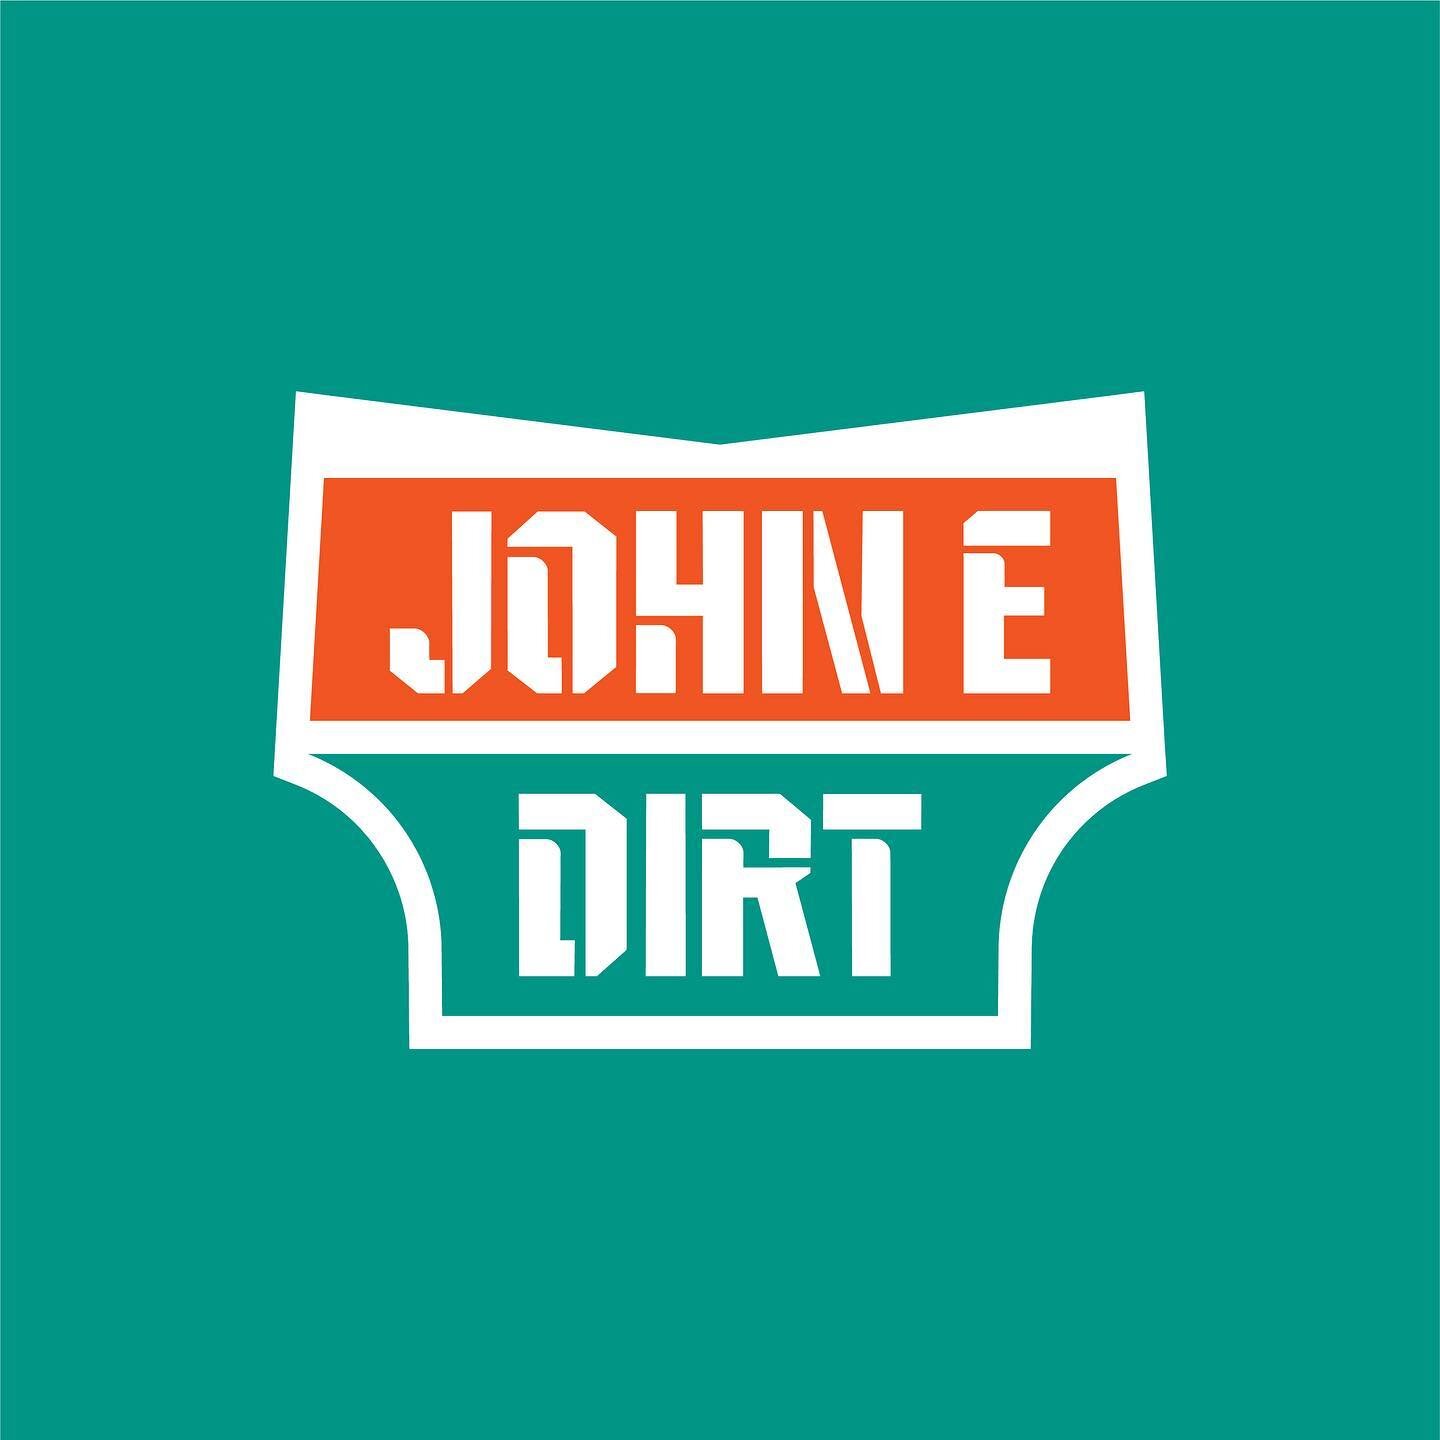 Unused John E Dirt rebrand concepts ⛏
&mdash;&mdash;
Got the rare opportunity to have another stab at one of the first custom types I ever made (4 years ago on CorelDraw!).
&mdash;
Ultimately, the client rejected the change and has kept the original 